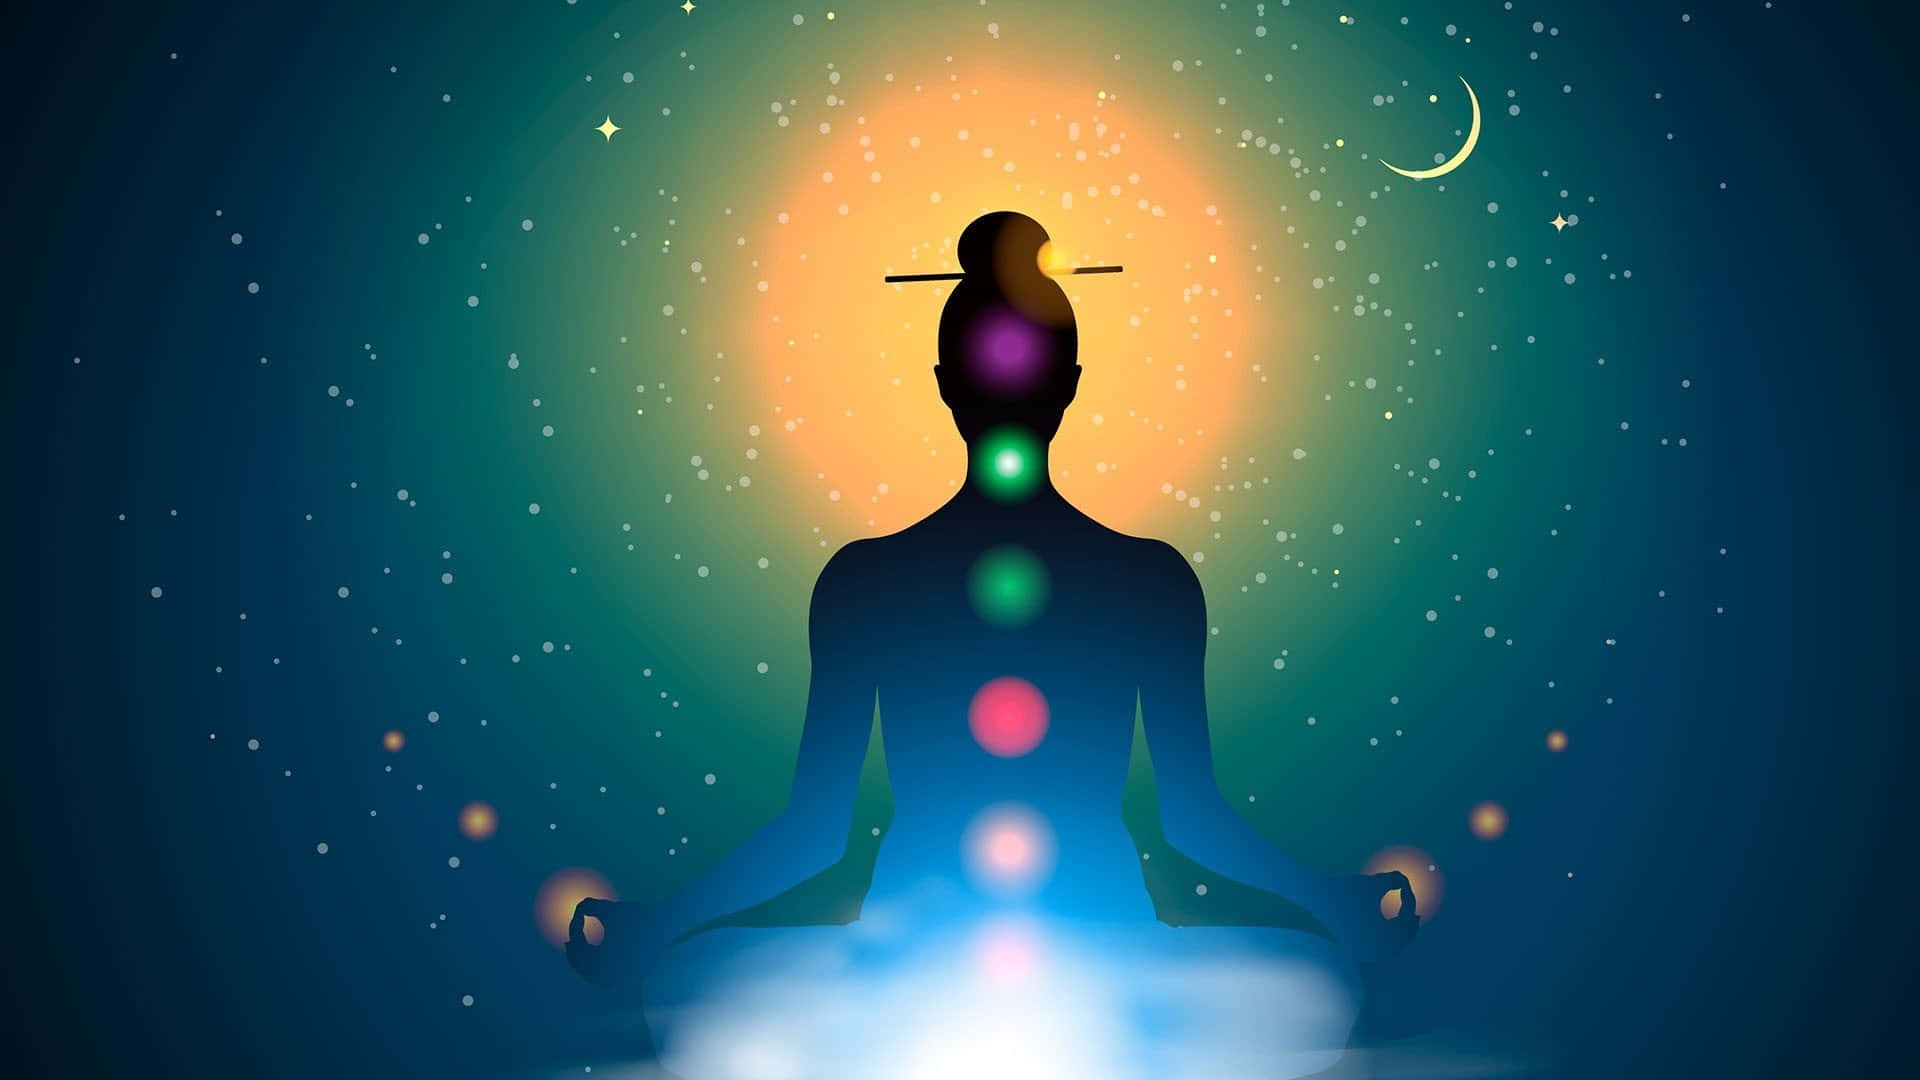 Cosmic Meditation Silhouette of a Person Sitting in Lotus Pose and  Achieving Enlightenment Spiritual Awakening Meditating Man Self Realization  Unlocking Seven Chakras and Opening Third Eye Animation HD wallpaper   Pxfuel